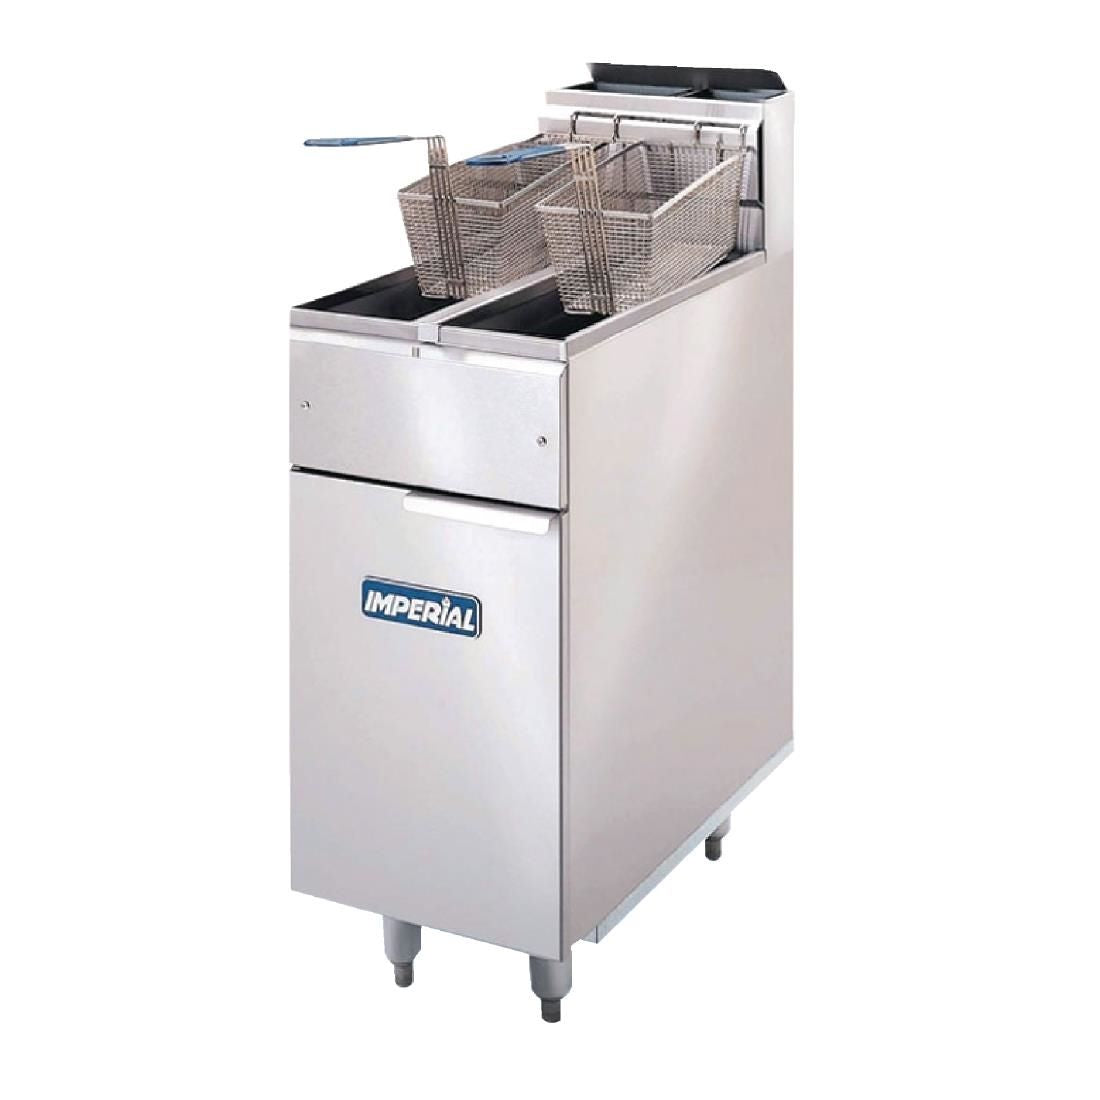 Imperial Twin Tank Twin Basket Free Standing Natural Gas/LPG Fryer IFS-2525 JD Catering Equipment Solutions Ltd